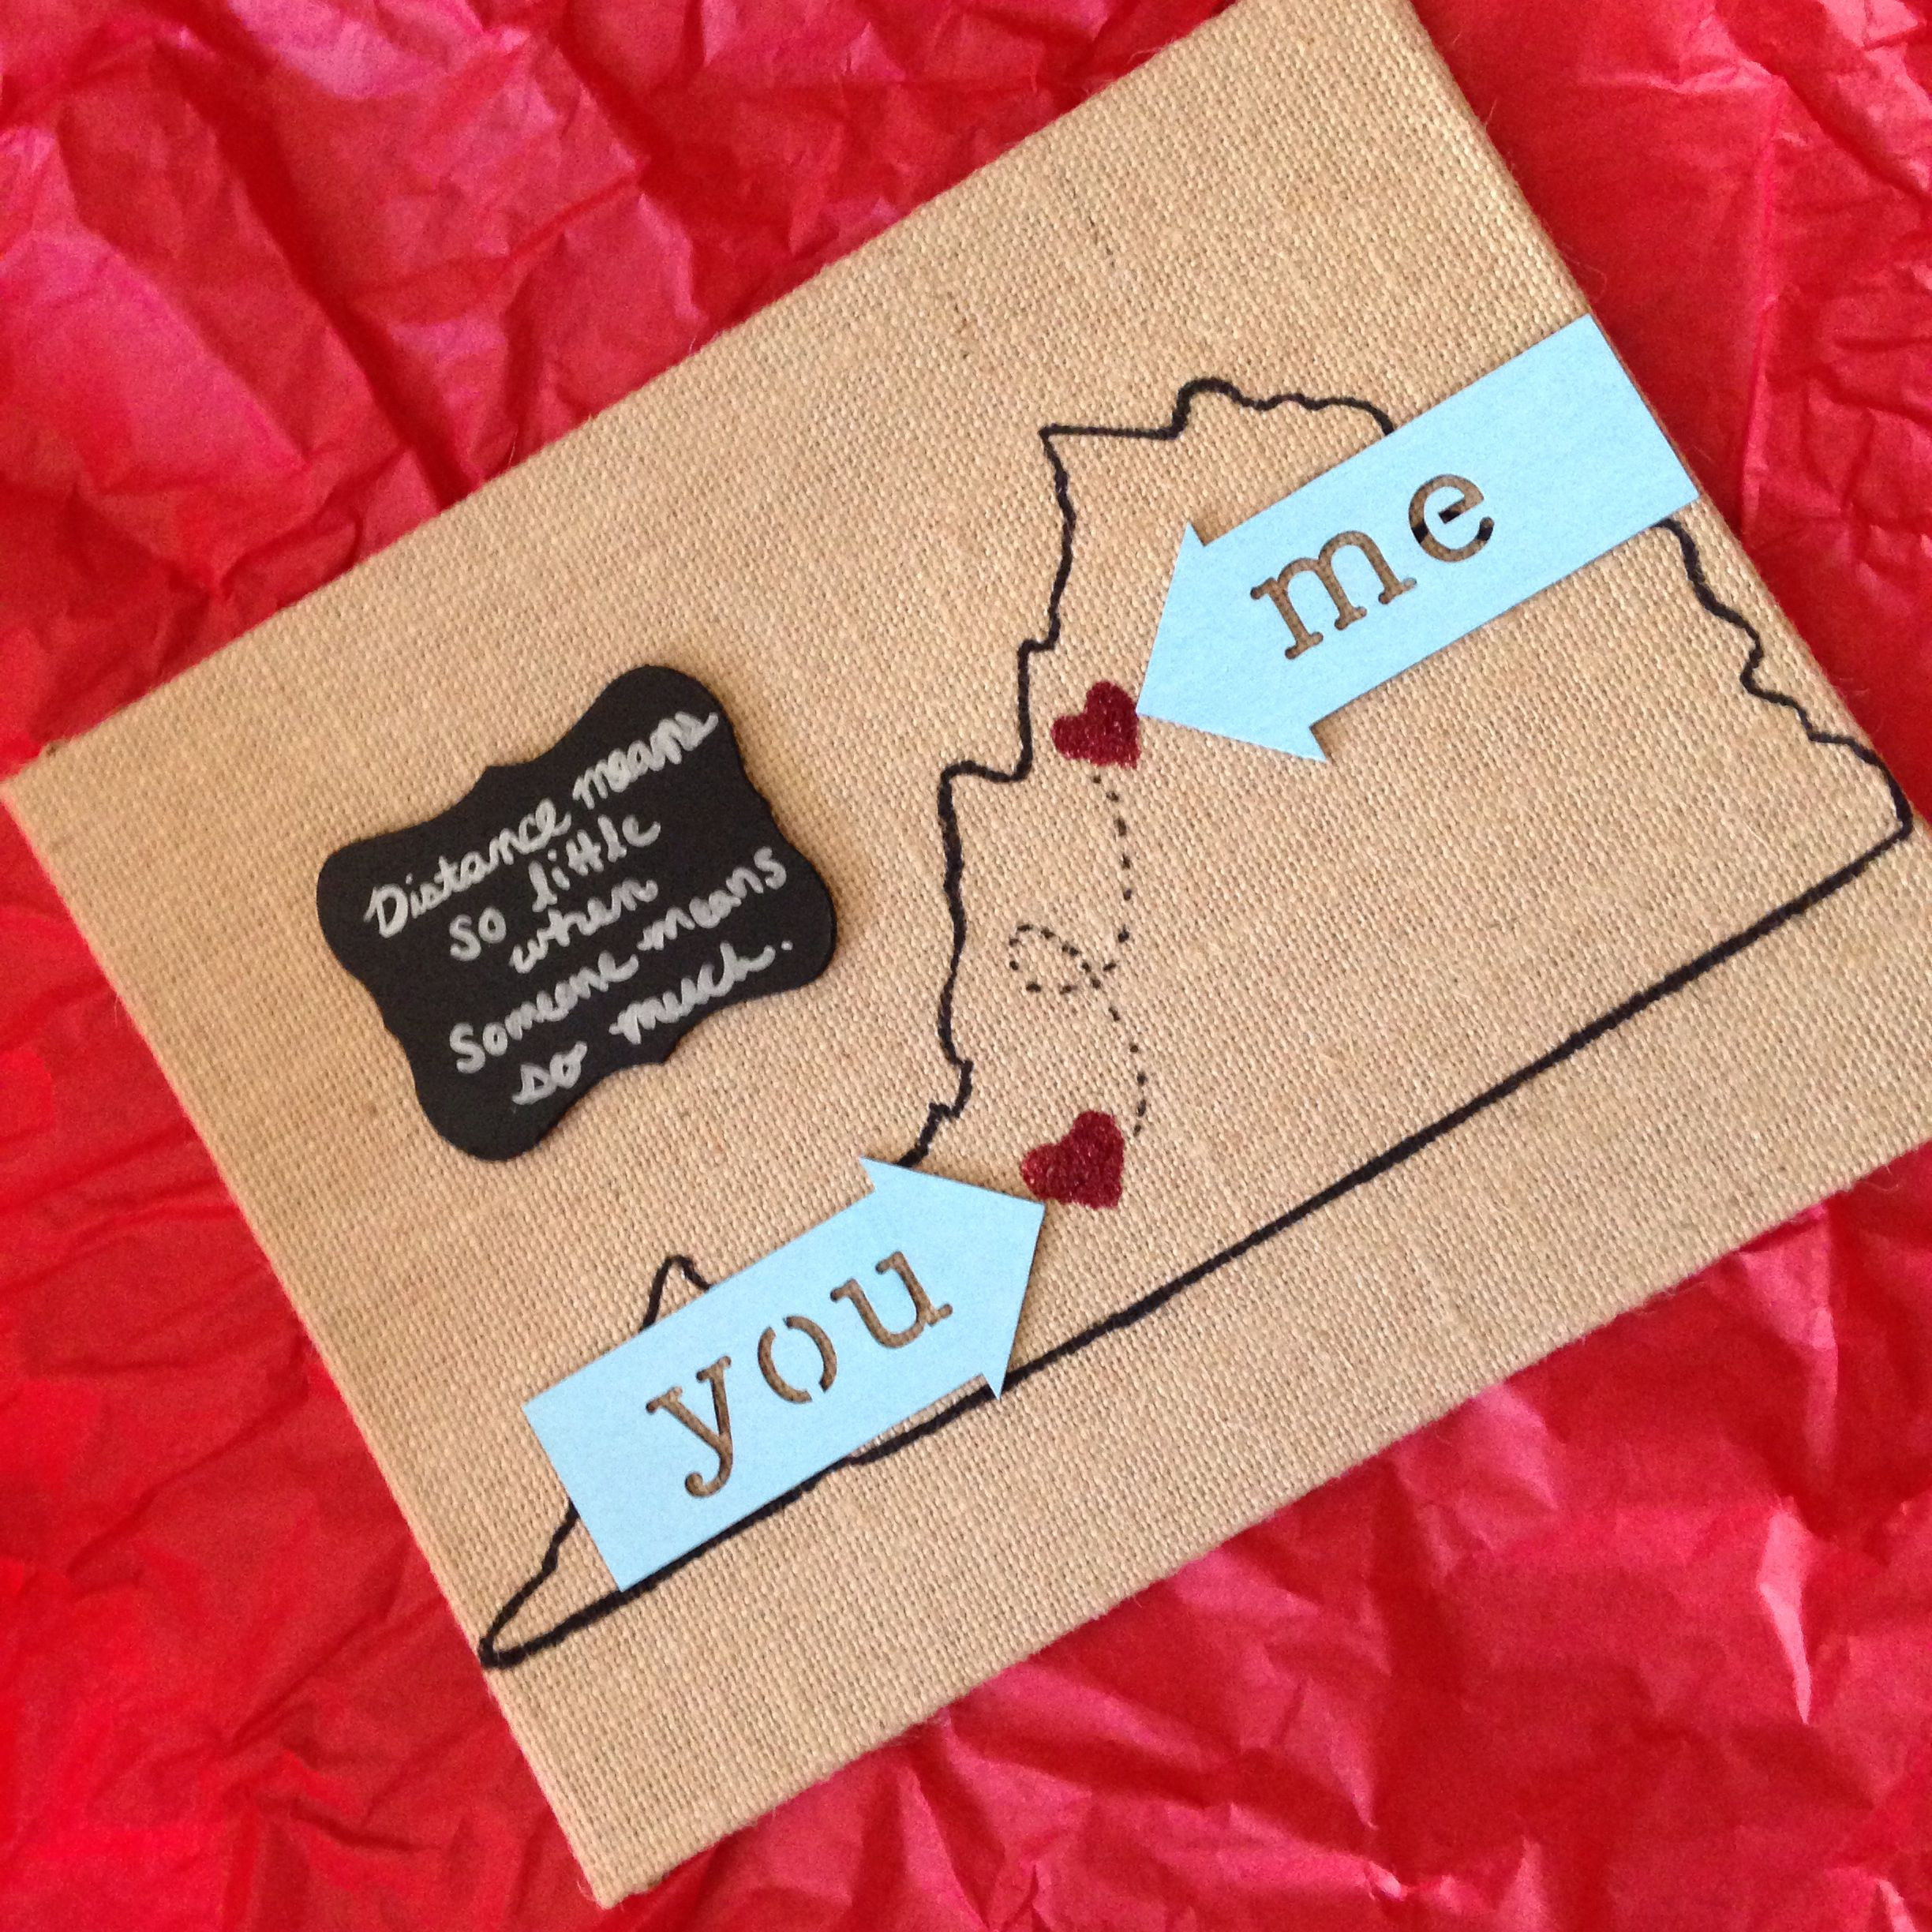 Gift Ideas For Long Distance Girlfriend
 I m in a long distance relationship & I made this for my